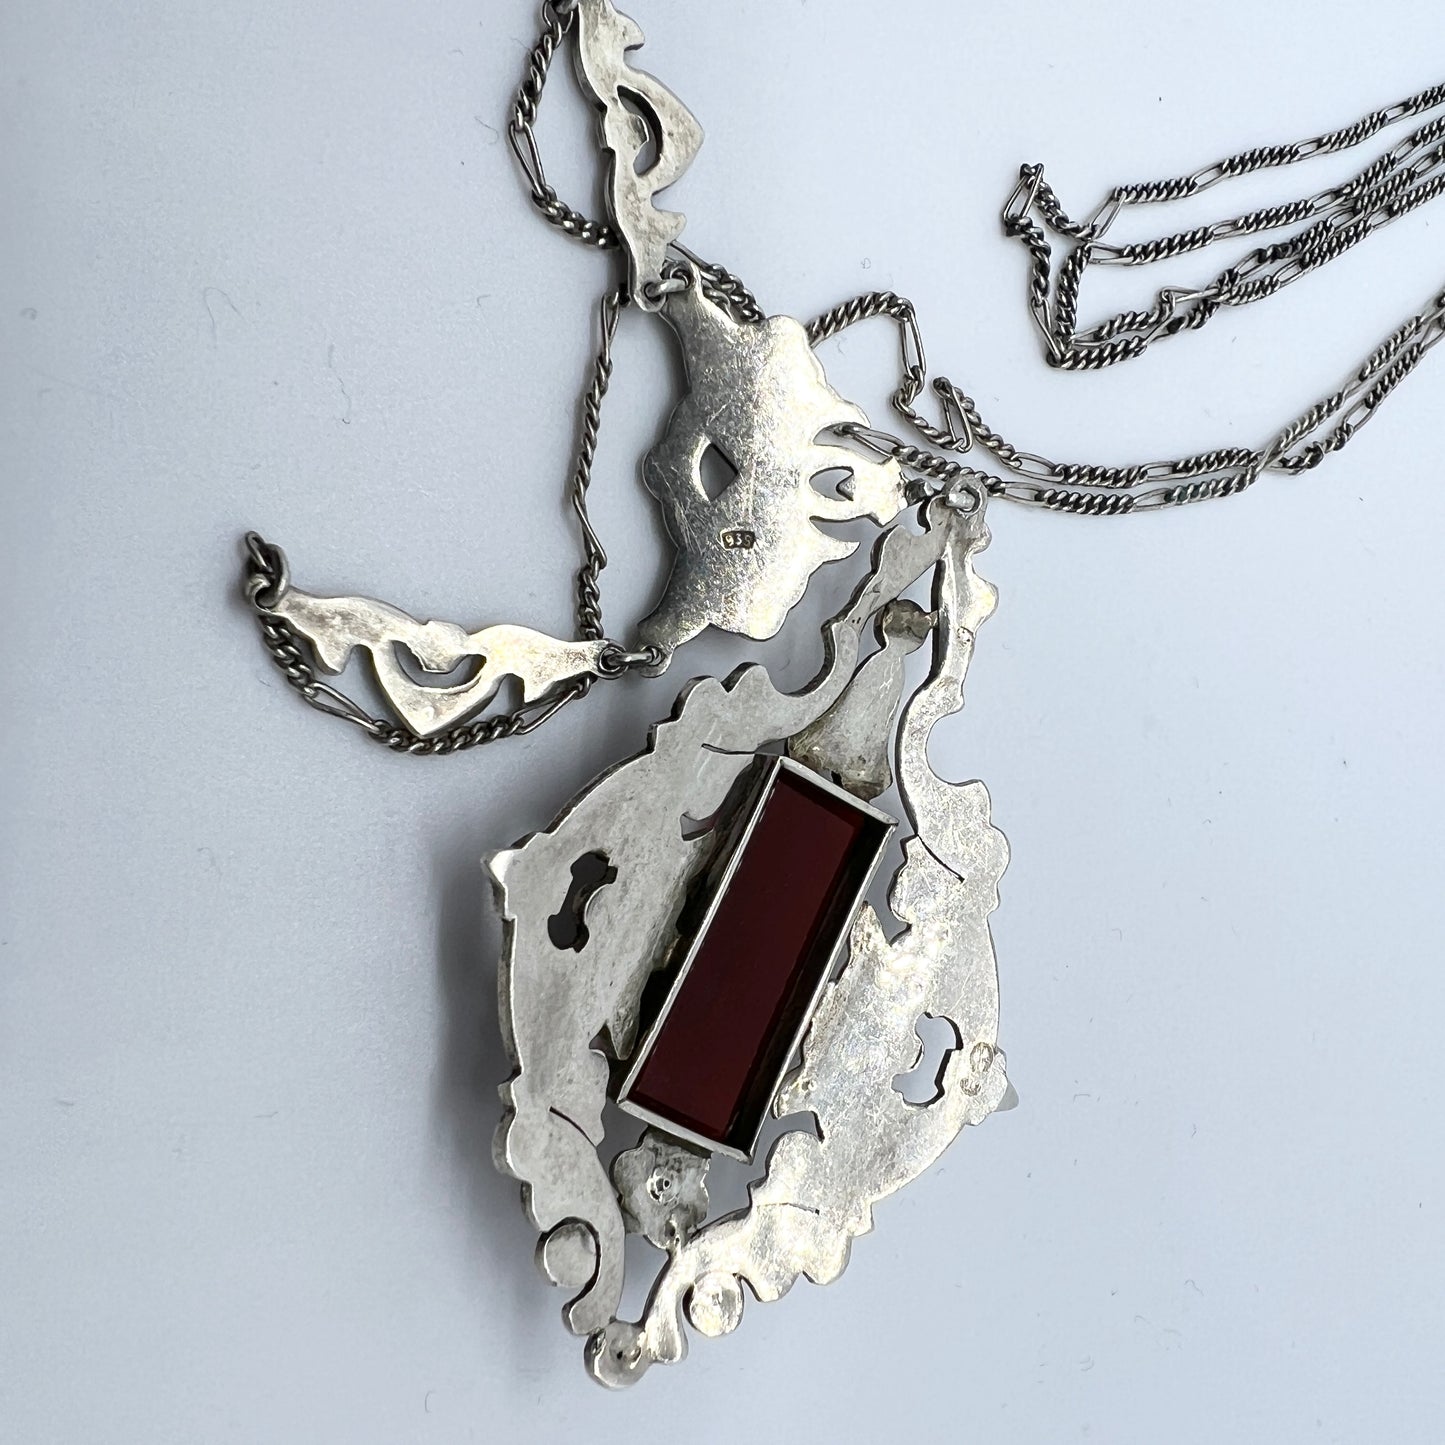 Austria / Germany Early 1900s. Sterling 935 Silver Carnelian Marcasite Necklace.